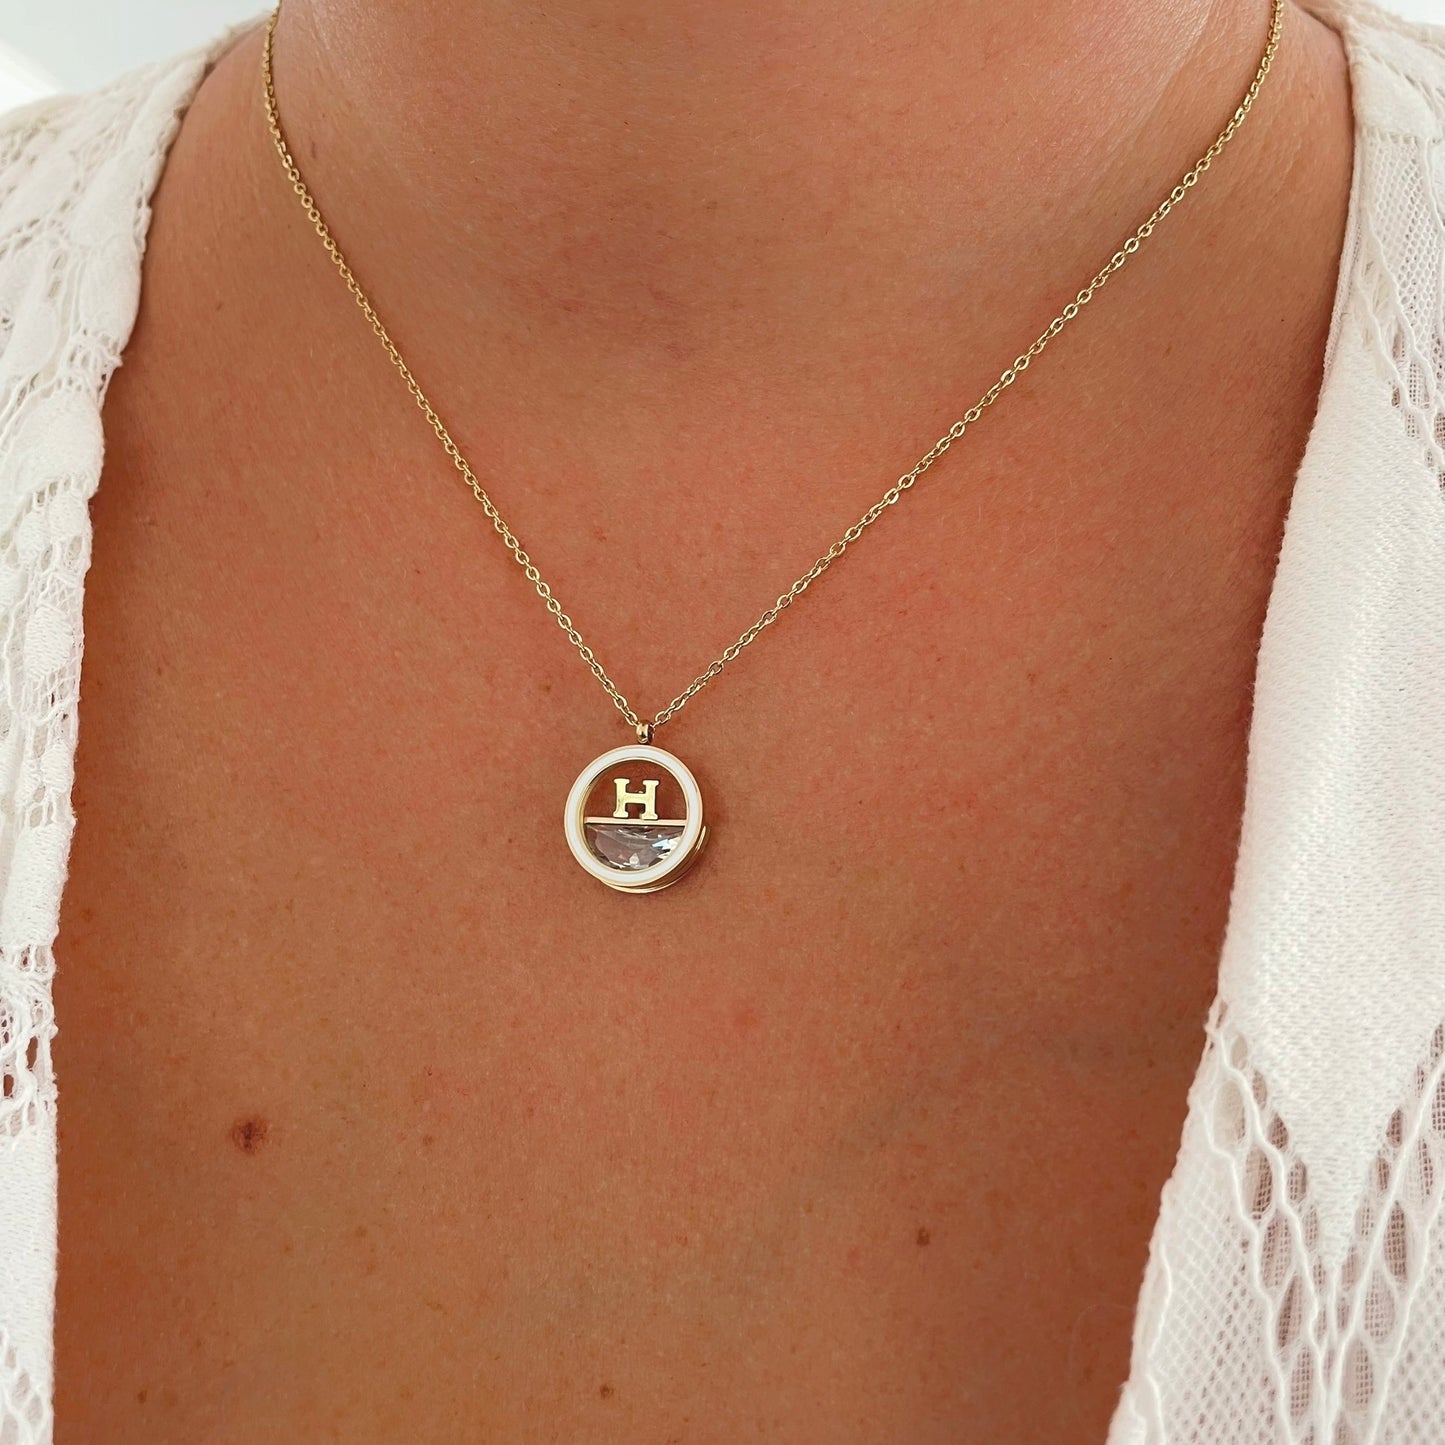 Collier H rond